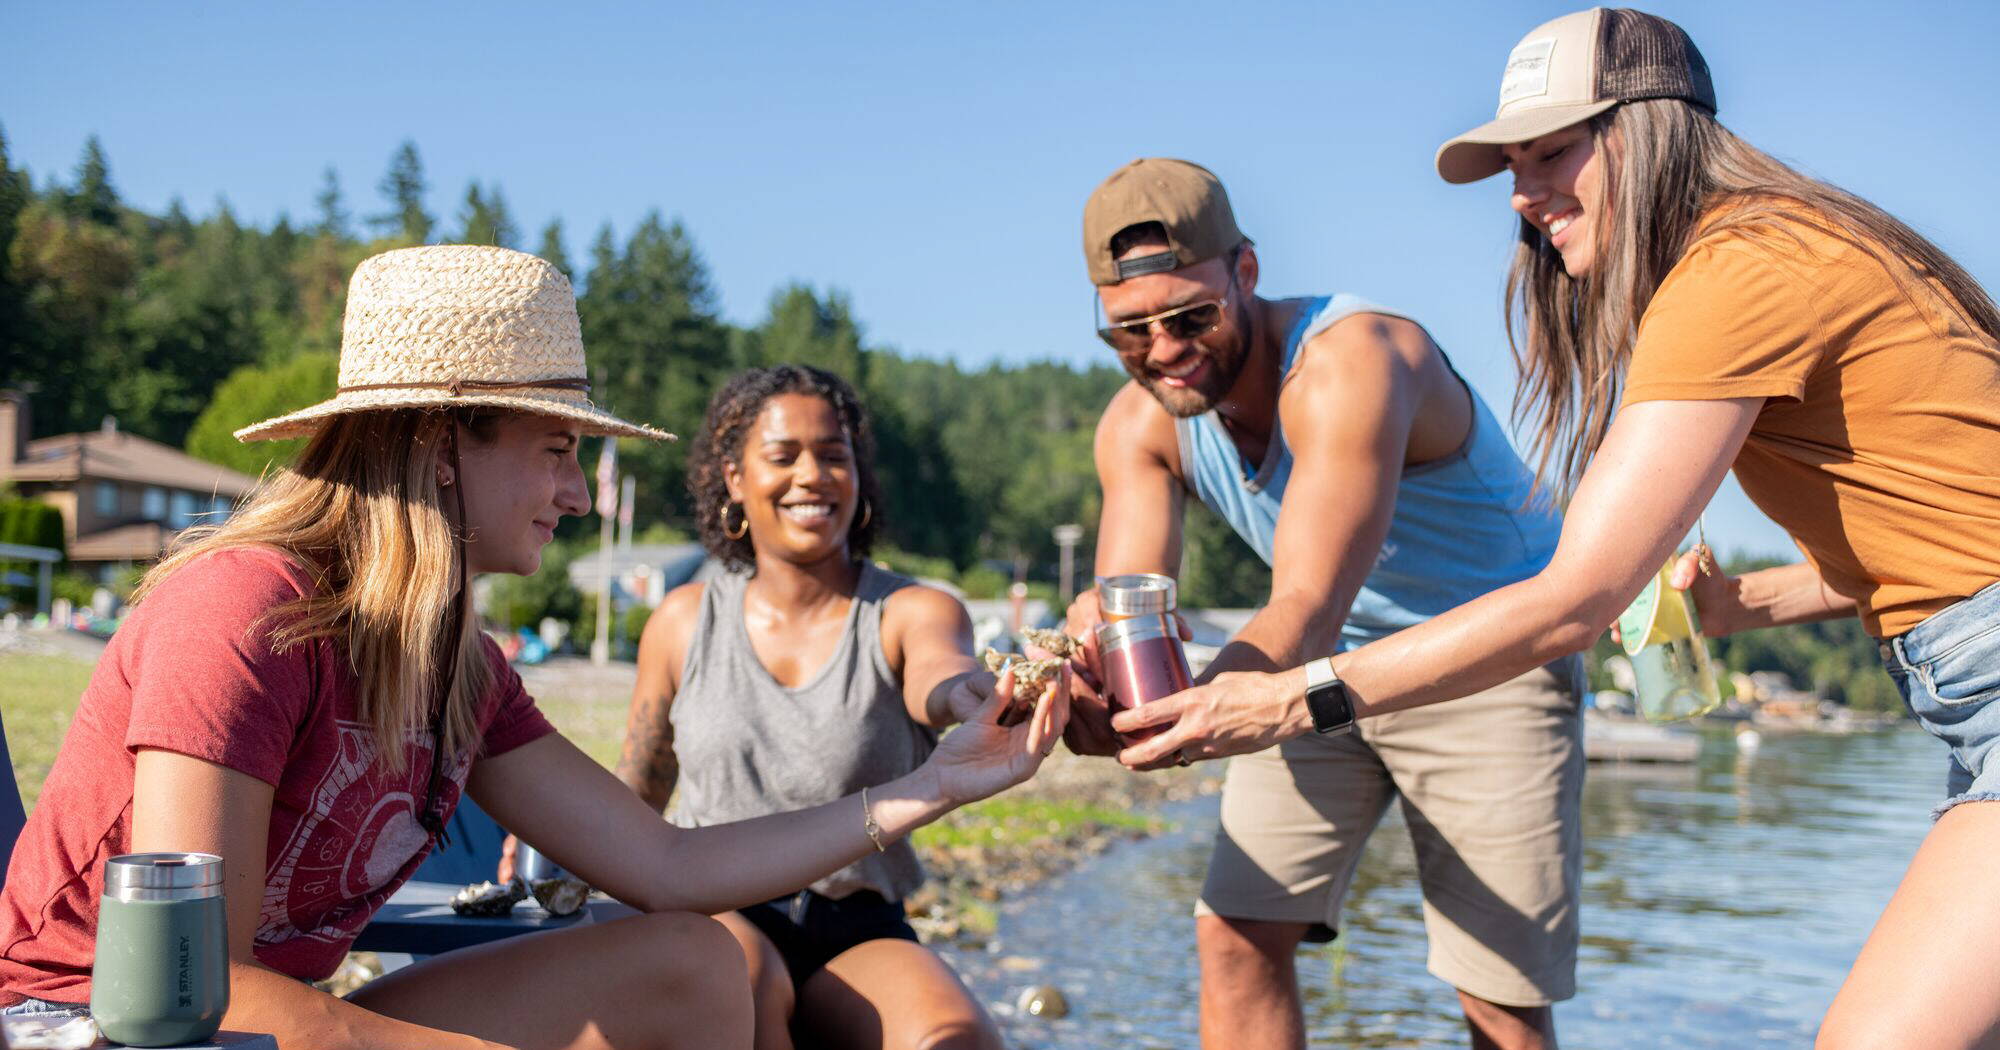 5 Reasons Why Your Next Gathering Should Be Outdoors